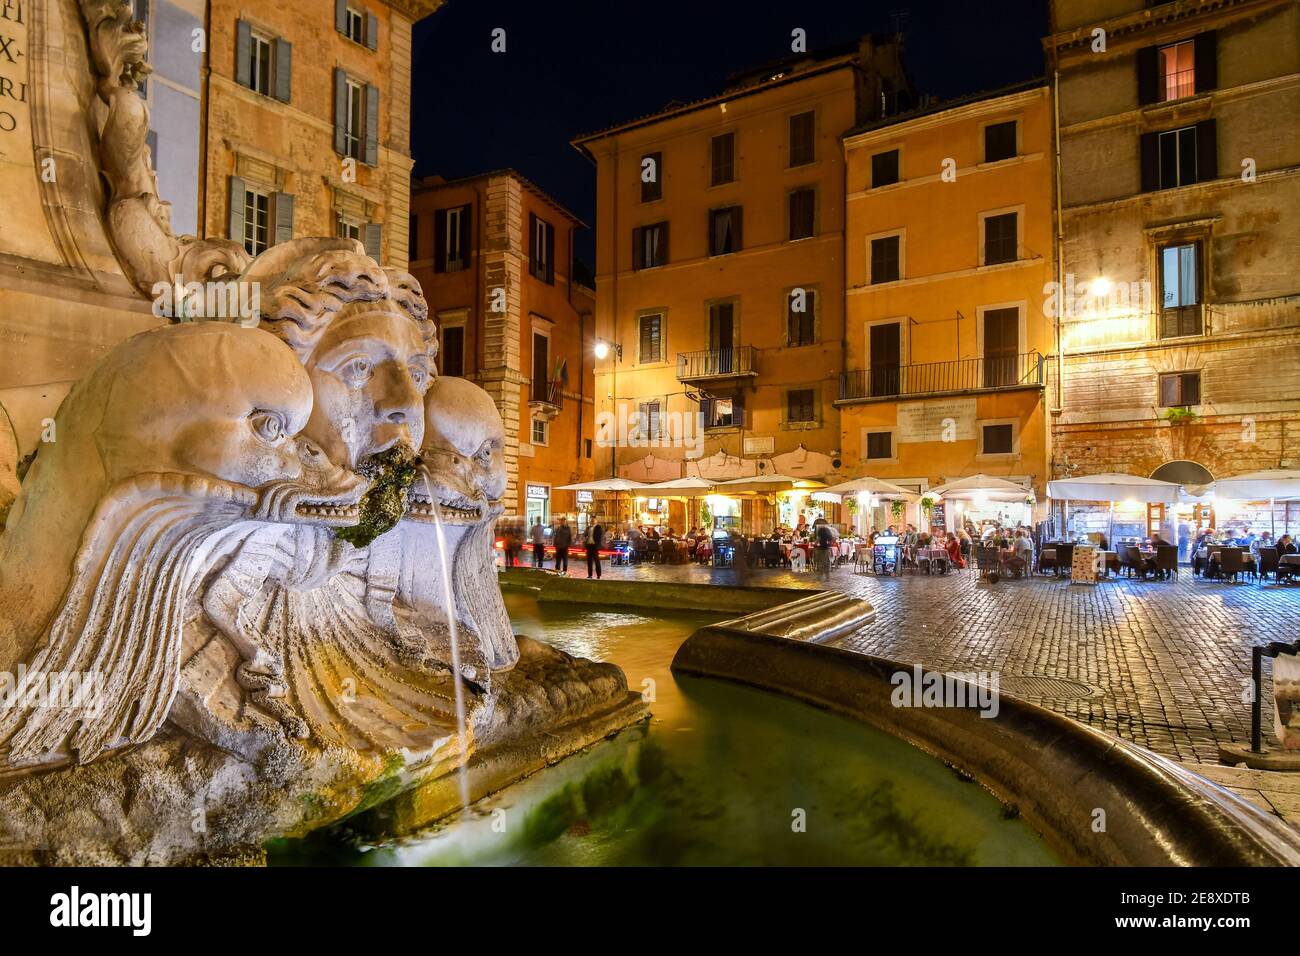 Closeup of the Pantheon Fountain or Fontana del Pantheon in the Piazza della Rotonda at night with sidewalk cafes and shops illuminated in Rome Italy Stock Photo